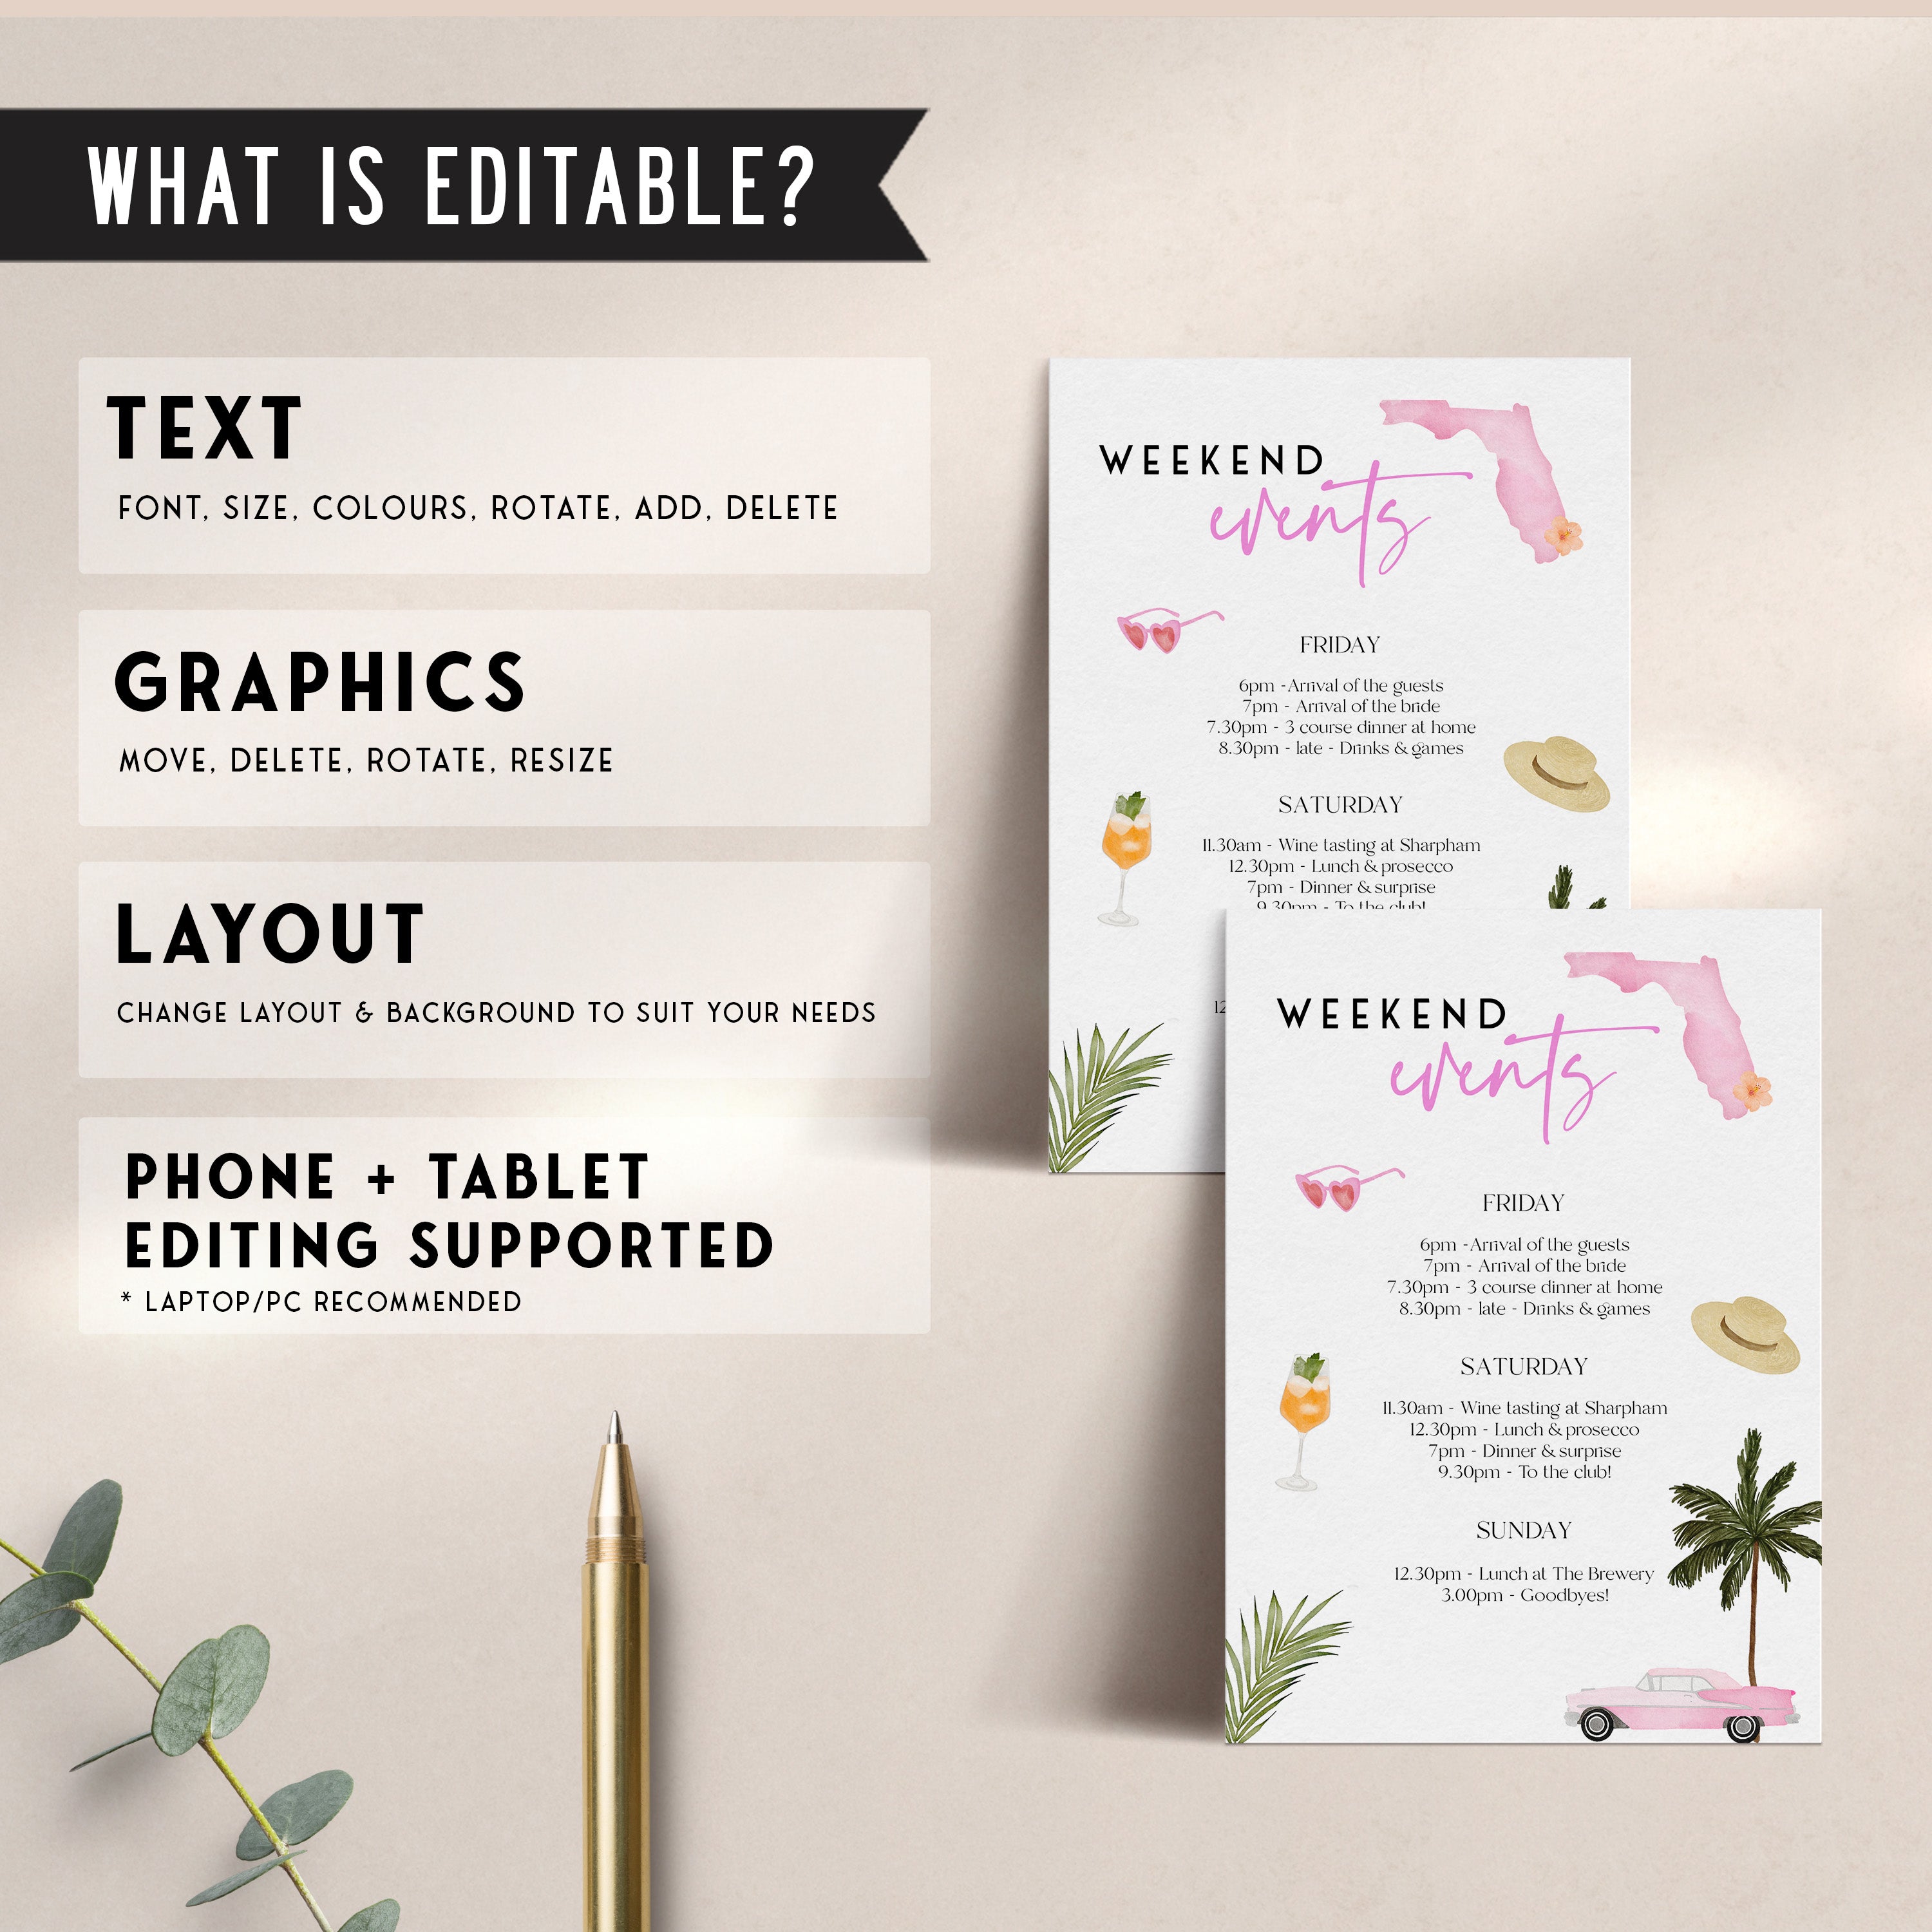 Fully editable and printable bachelorette itinerary with a miami design. Perfect for a miami, Bachelorette themed party